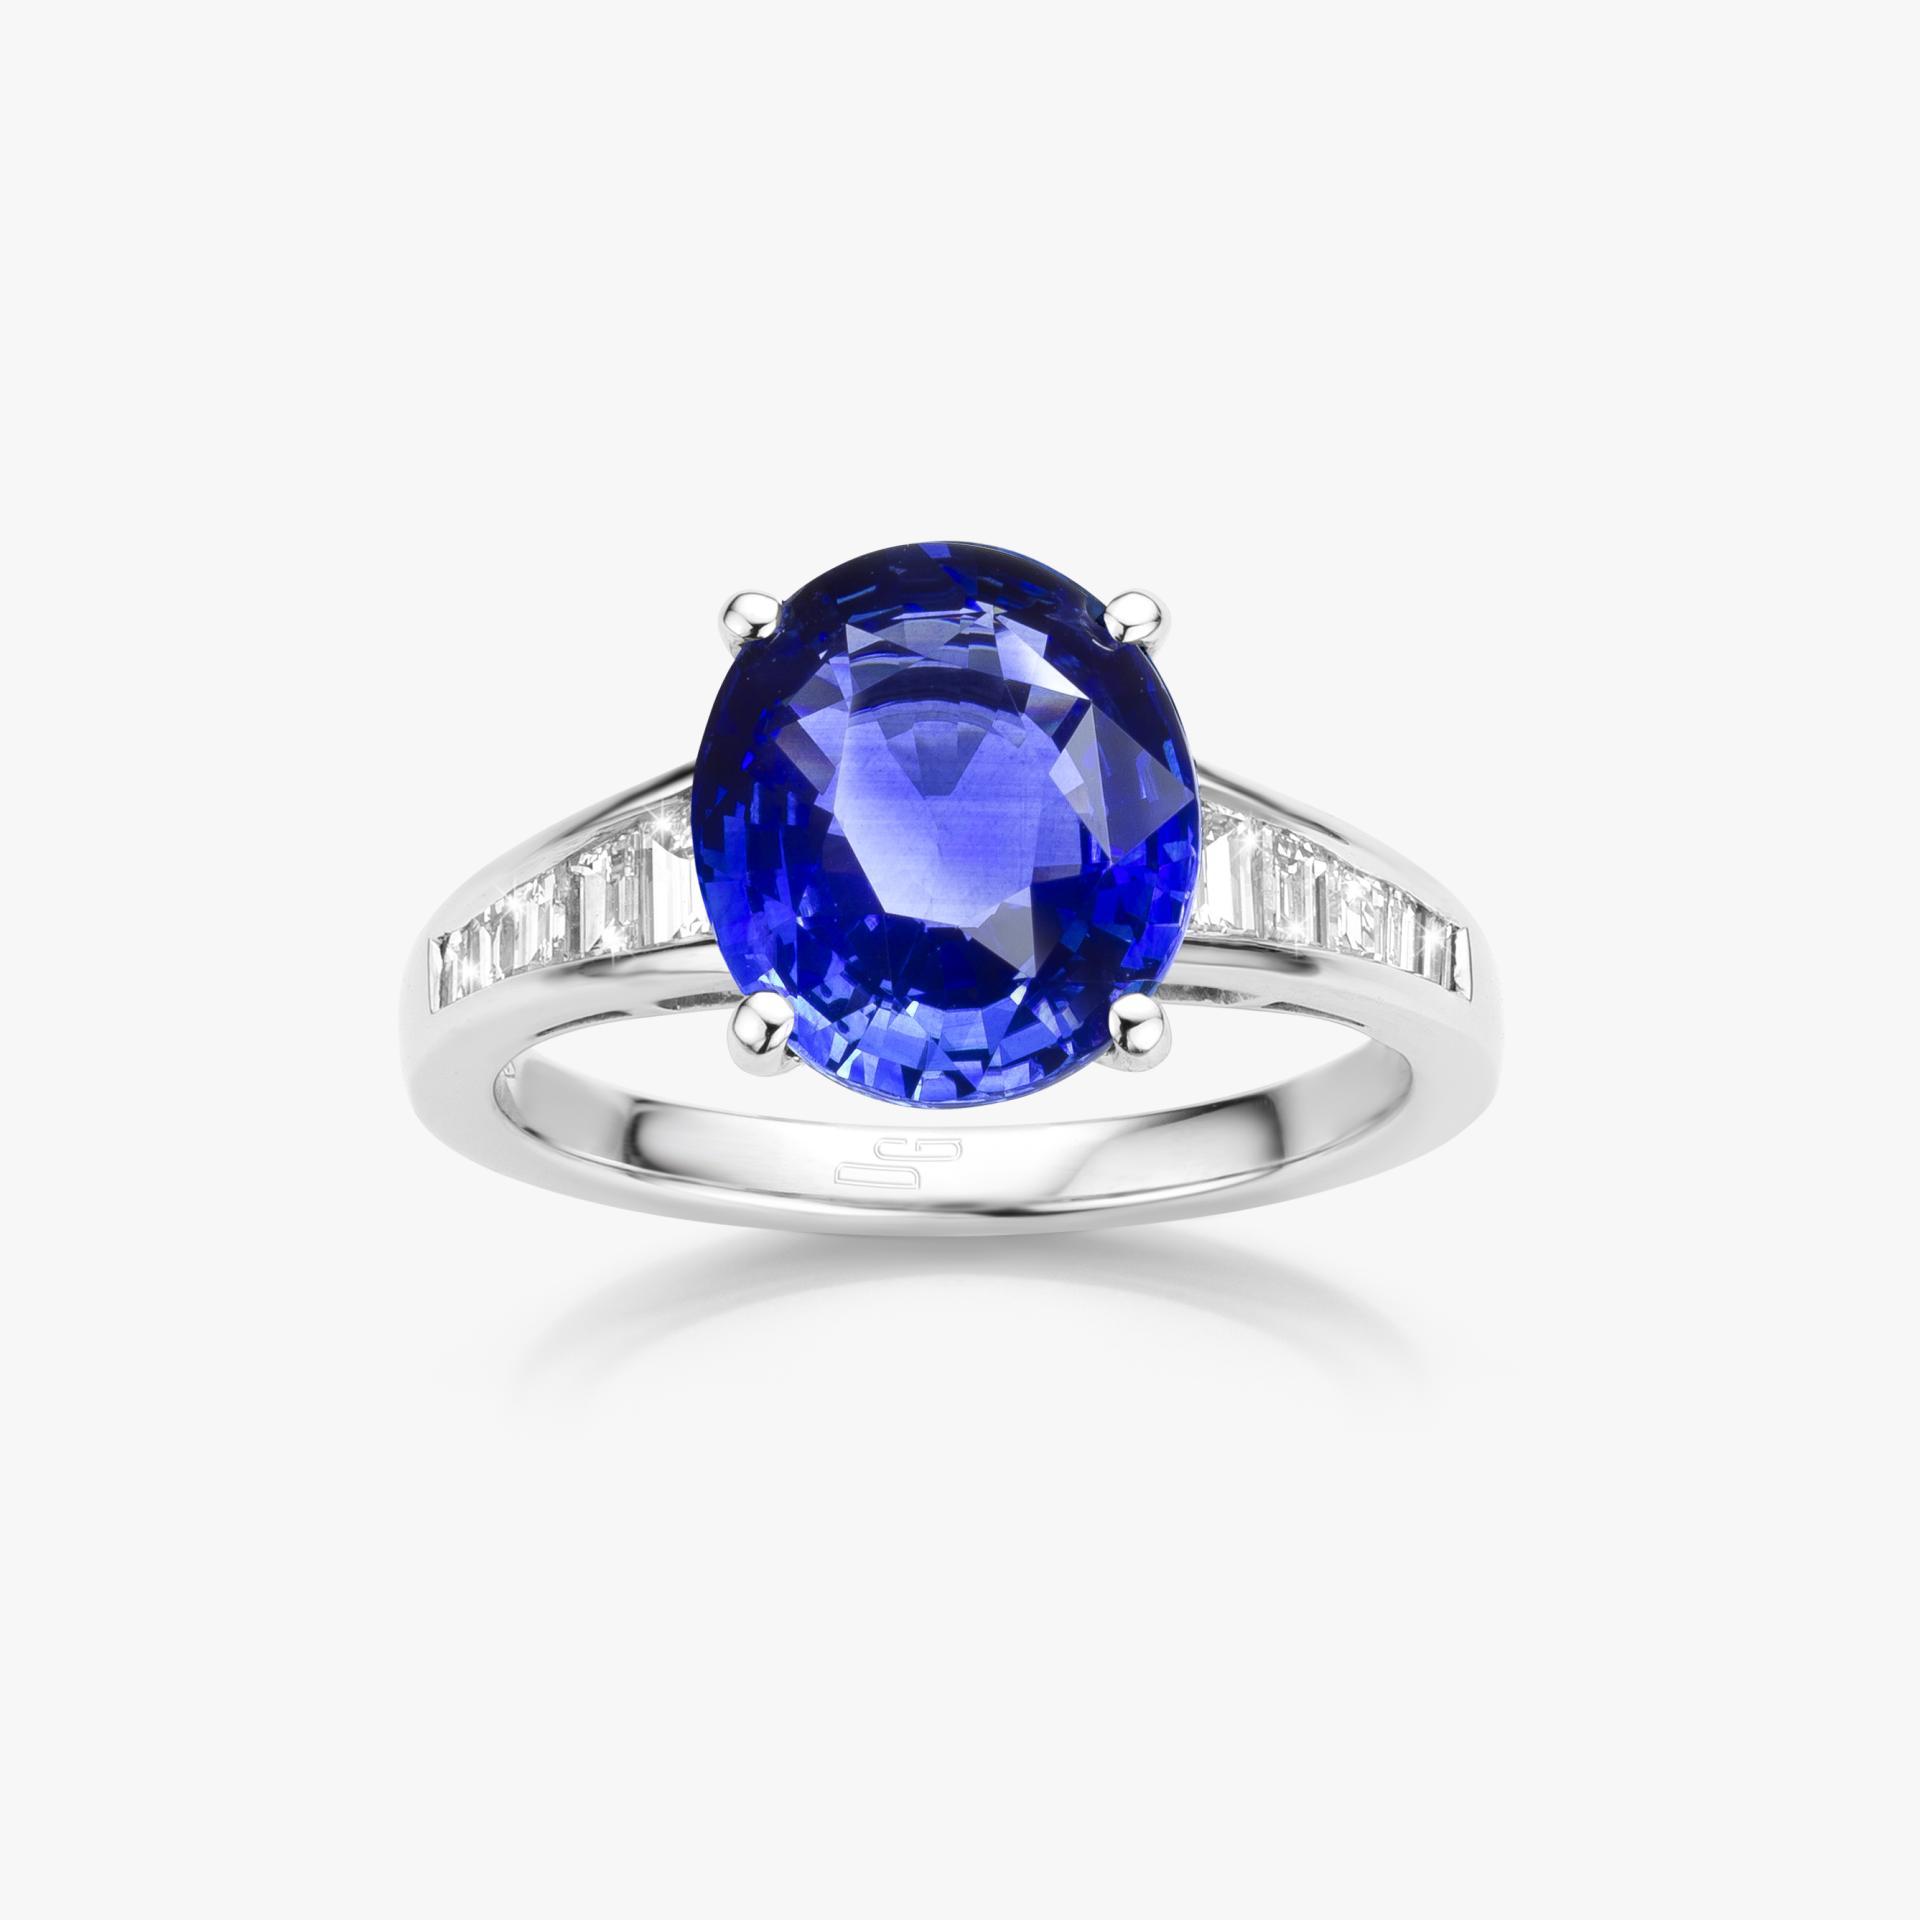 White gold ring set with oval shaped blue sapphire and emerald shaped diamonds made by Maison De Greef